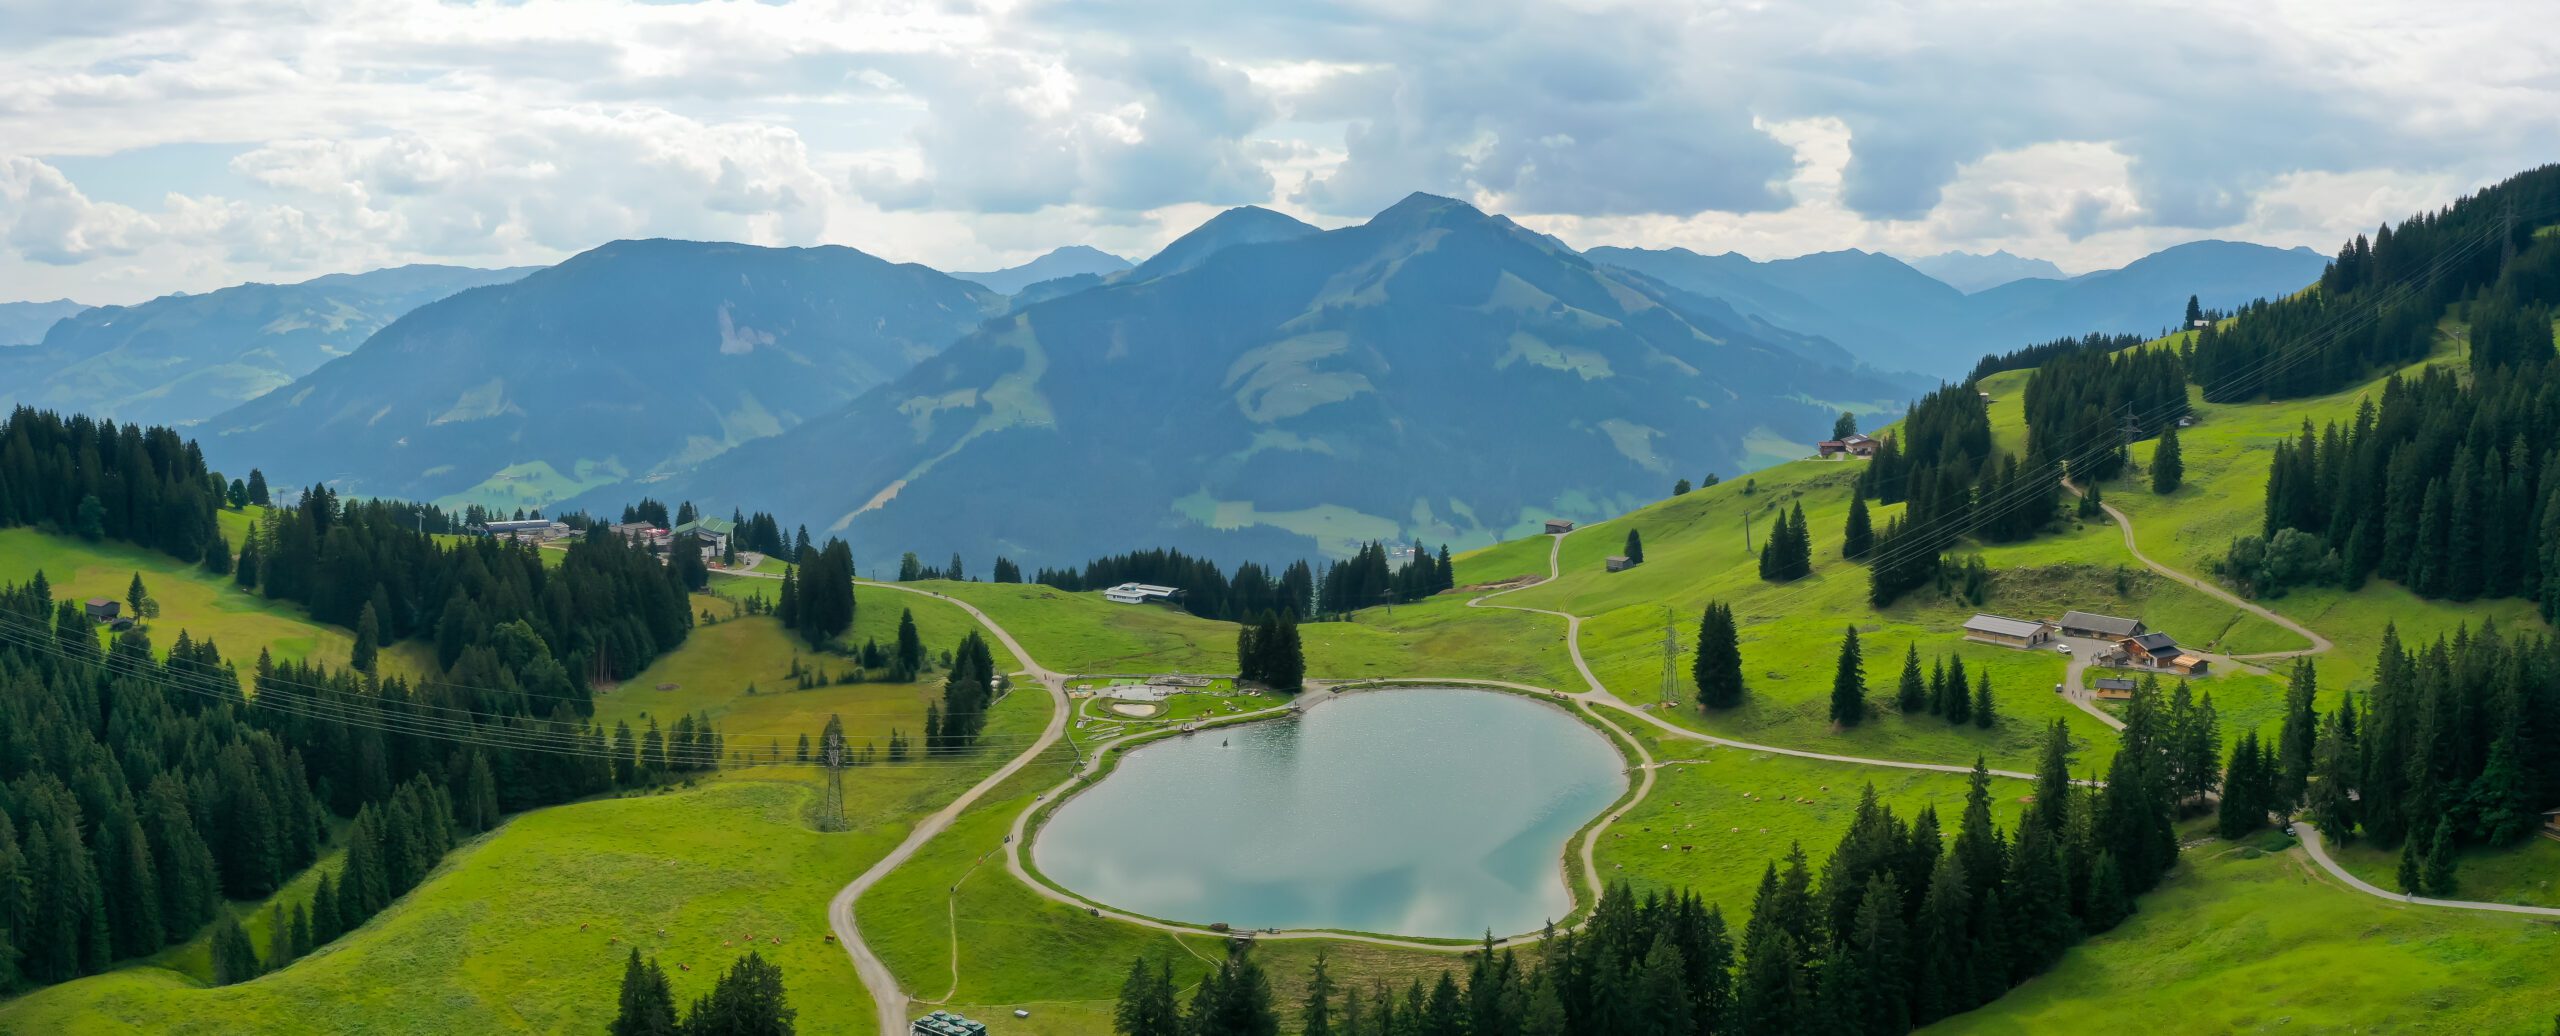 Panoramic shot of the Filzalmsee surrounded by hills covered in greenery in Austria